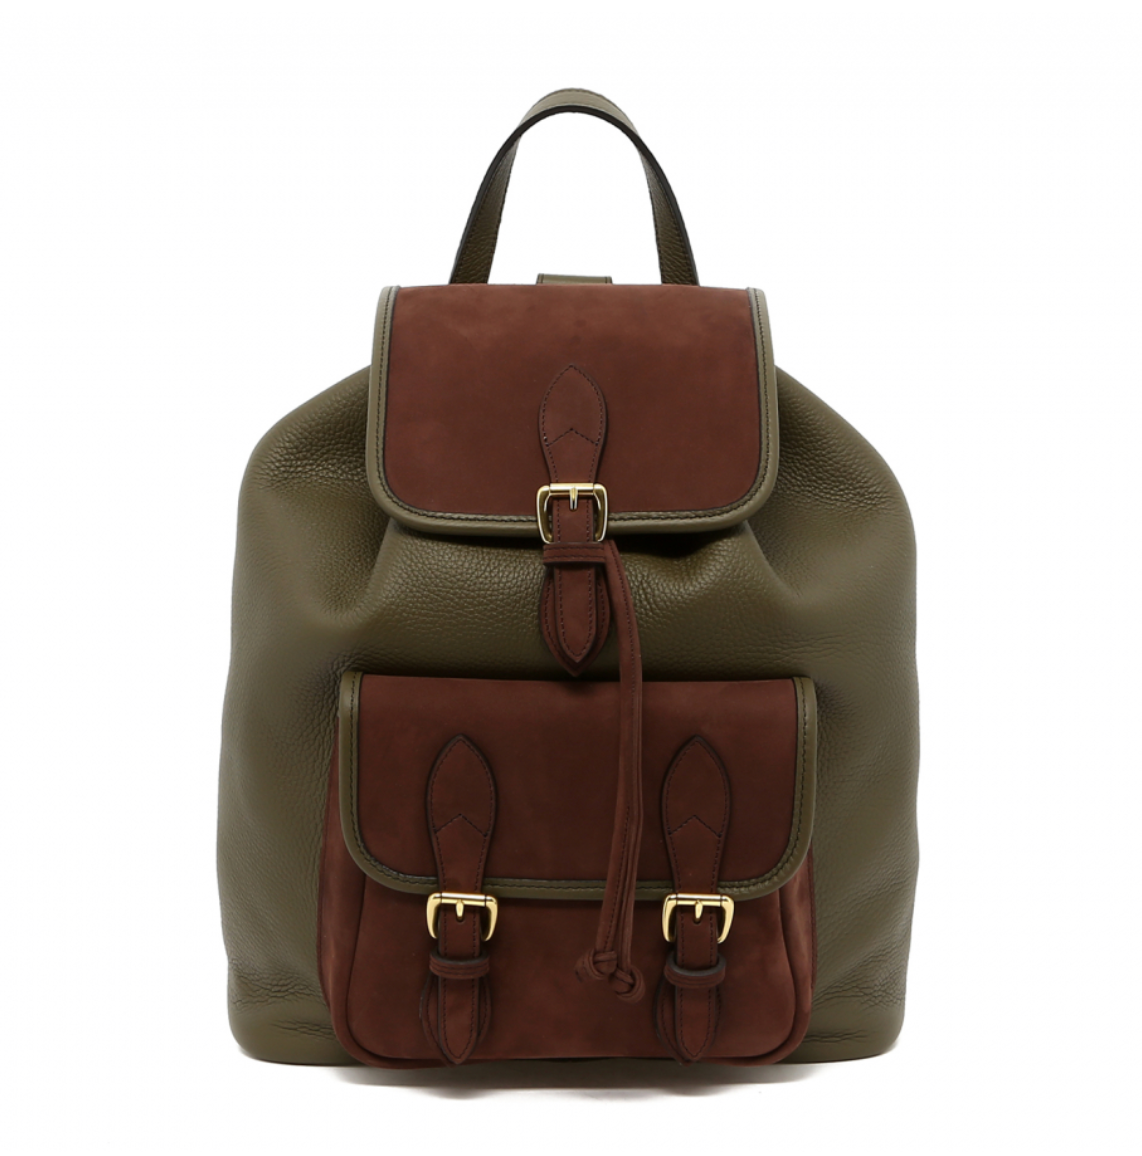 Classic Backpack - Tumbled Light Military/Brown Nubuck